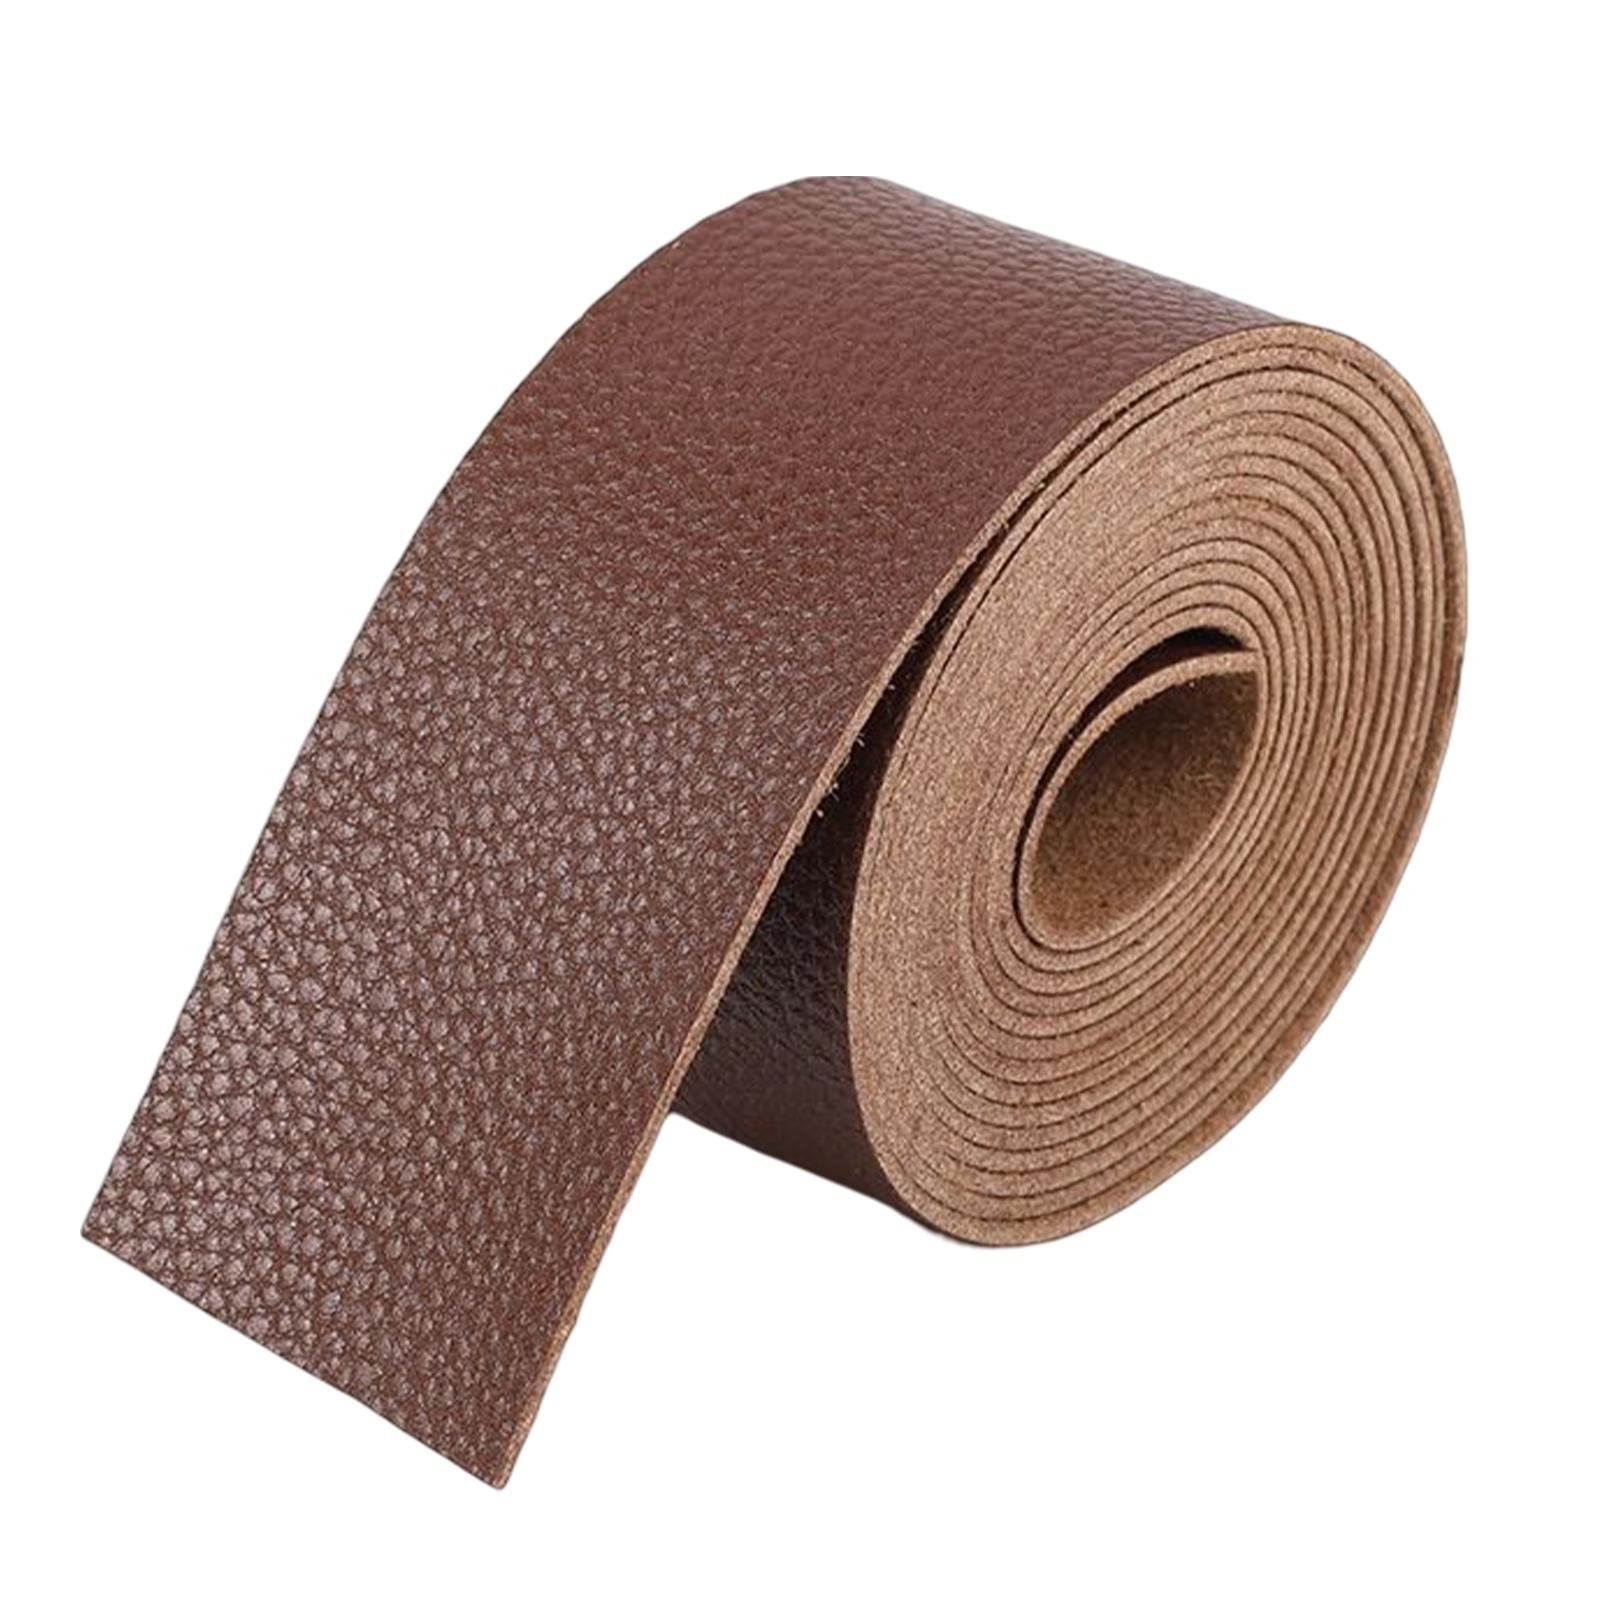 PU Leather Strap Strips Decorative Supplies for Workshop Purse Tooling Coffee